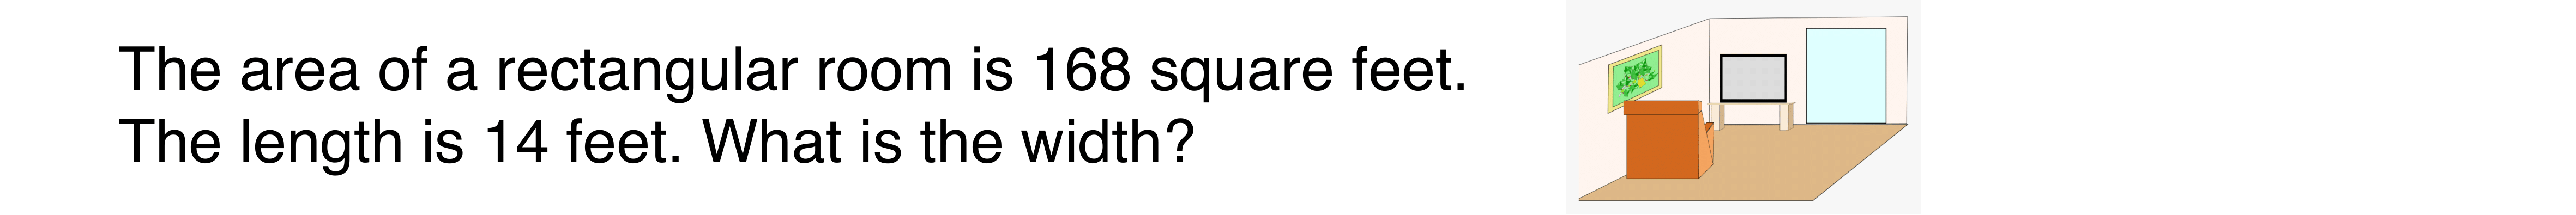 The area of a rectangular room is 168 square feet. The length is 14 feet. What is the width?